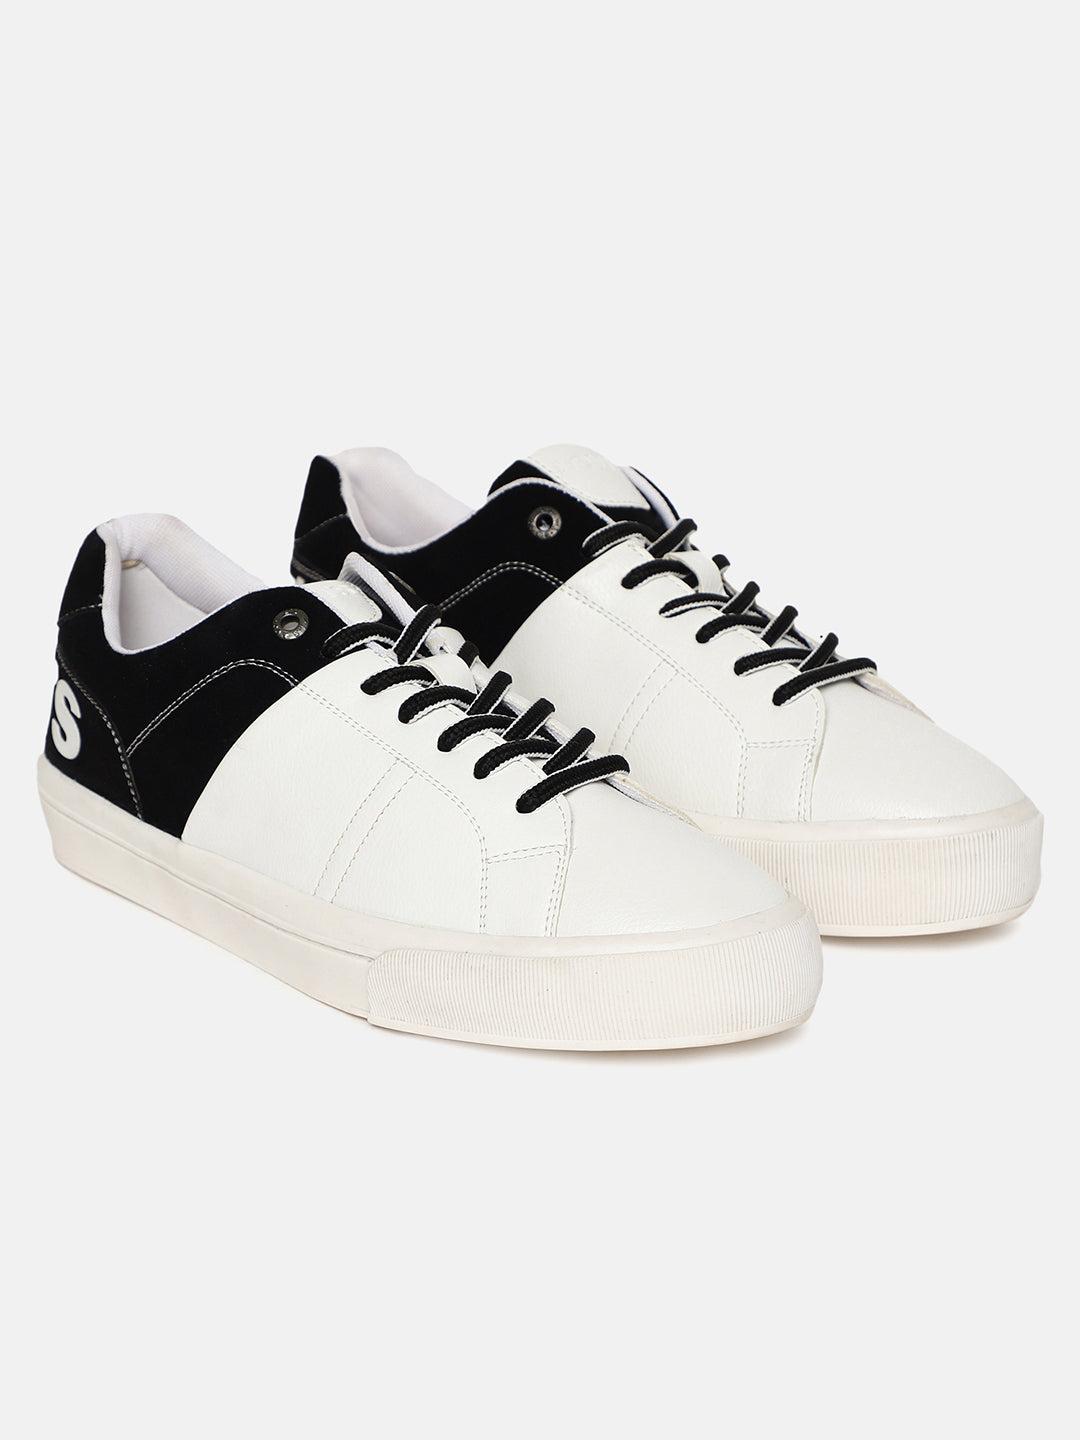 men's white and black colorblock sneakers